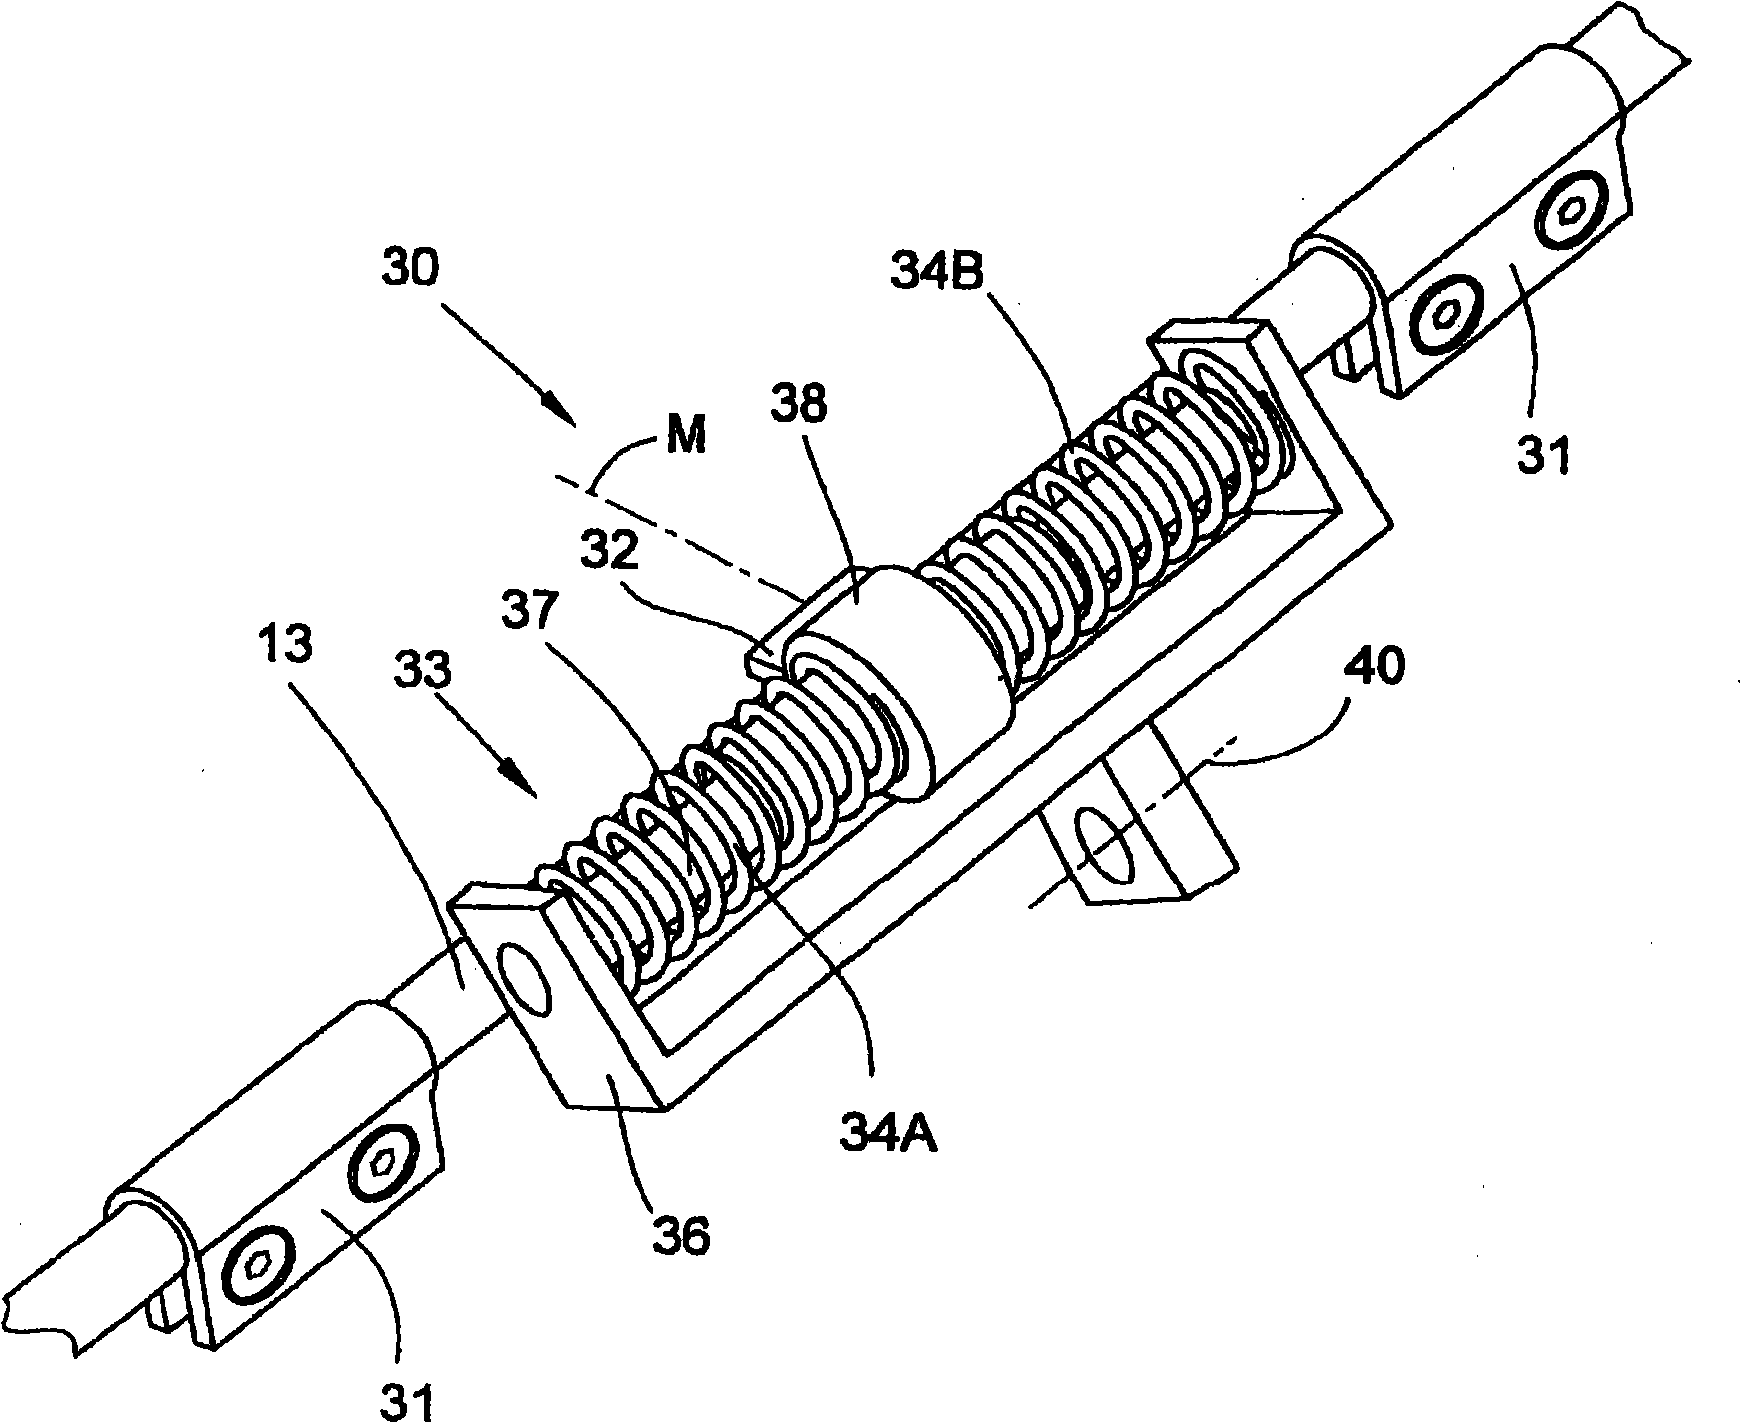 Cross-winding device for a textile machine which produces cross-wound bobbins